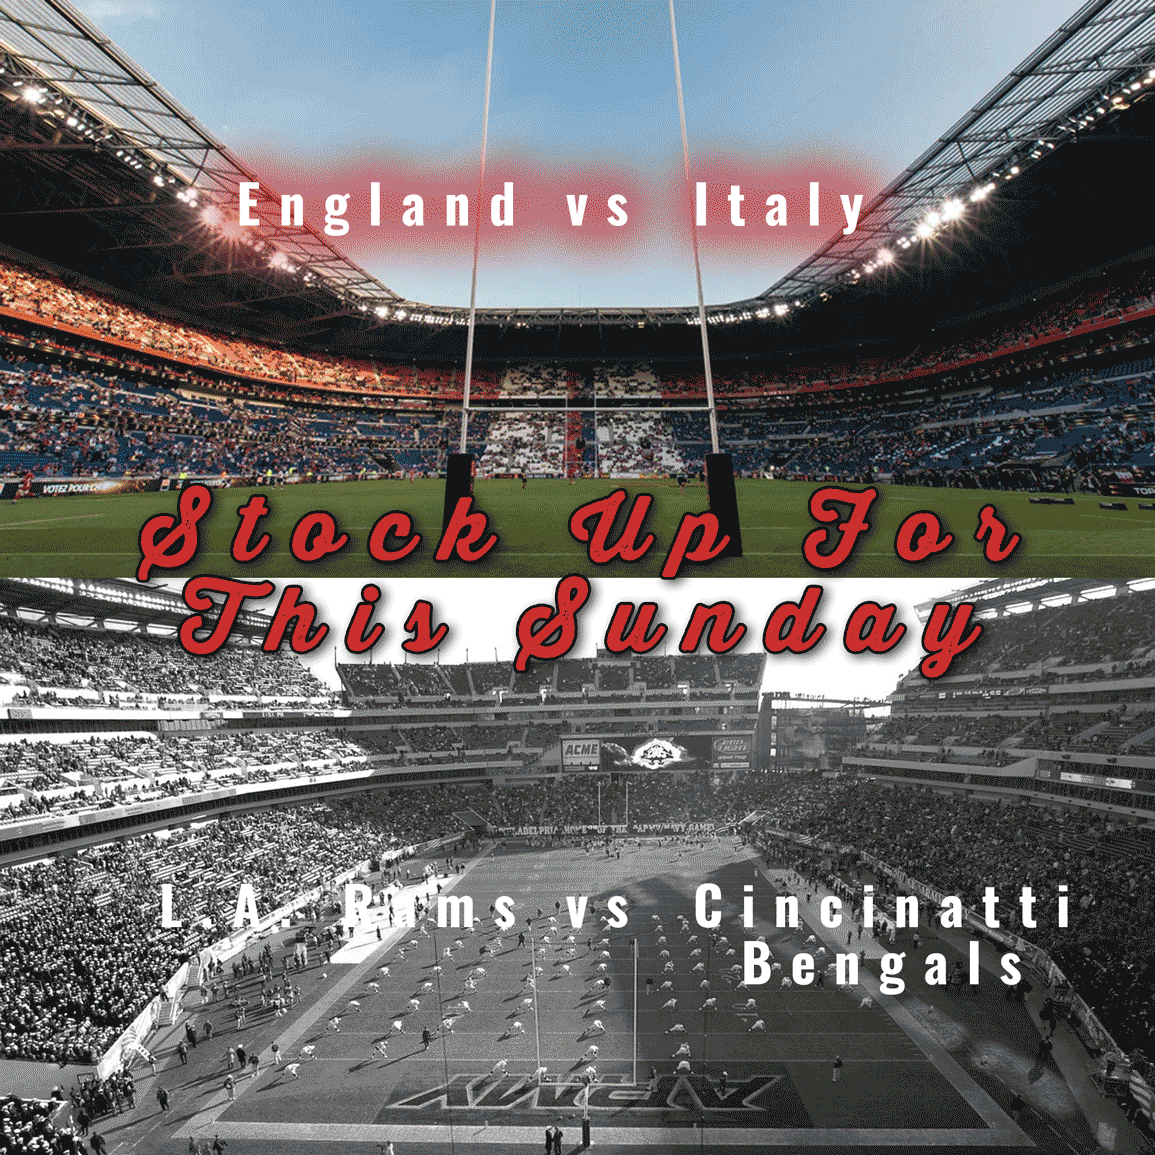 The two main games on this Sunday, something worth stocking up for 